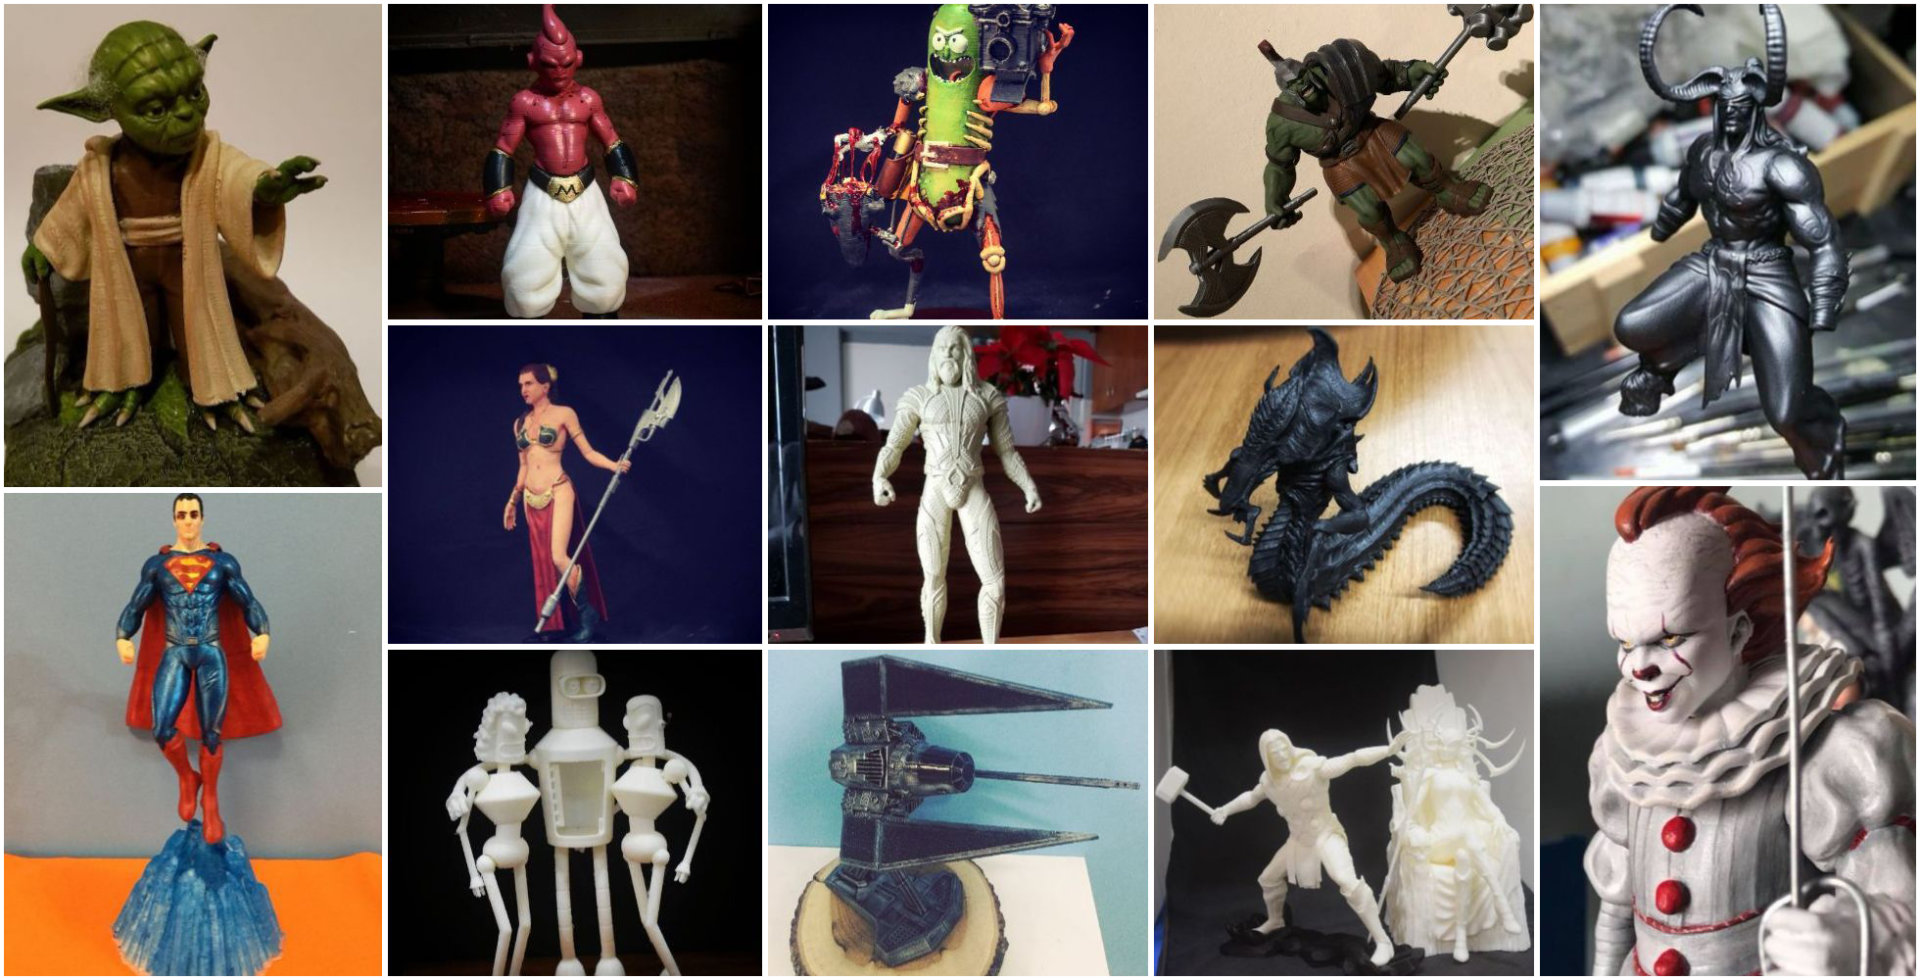 Jan’ 3D Printed Figurines Pick of the Month